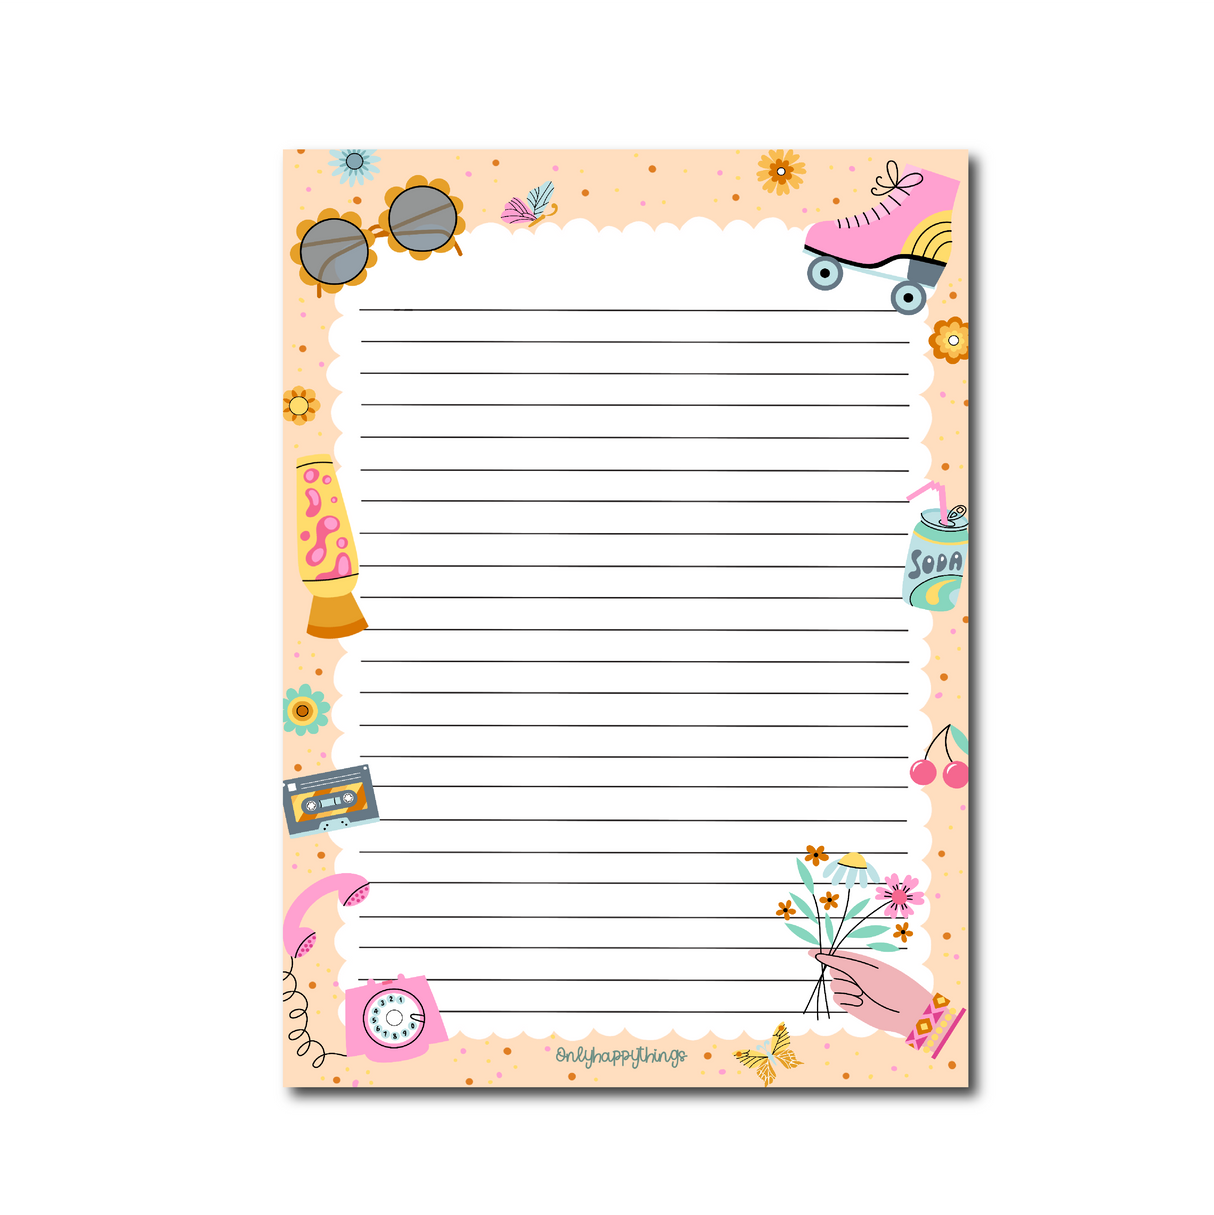 Retro A5 Notepad border with cartoon illustrated disc ball, roller skates, lava lamp, phone, record, tape cassette, and flowers in shades of pink, yellow, brown and orange